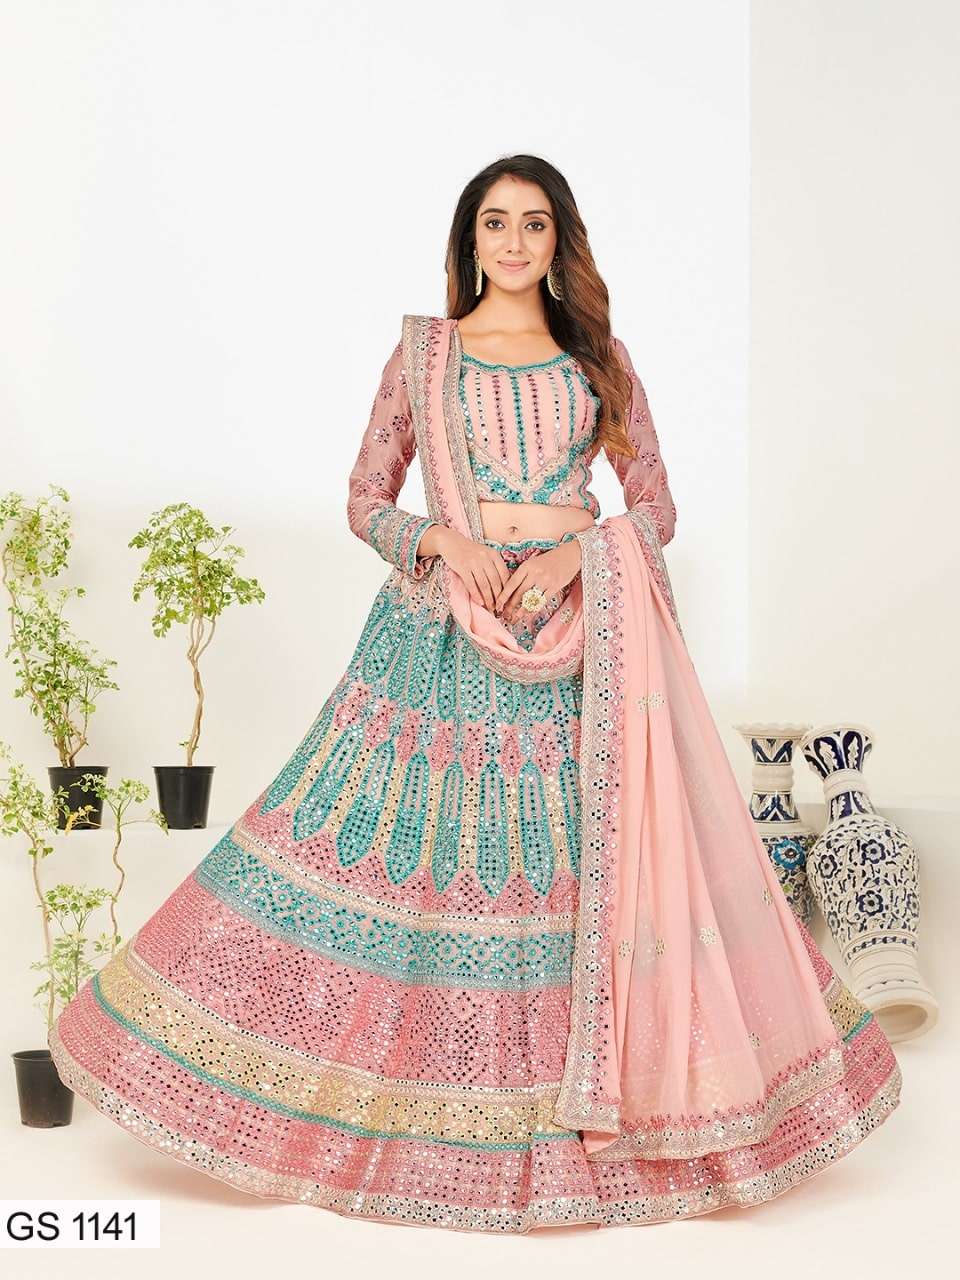 Urva Vol 3 D-1141 Lehenga For  online at best Low prices in India collection